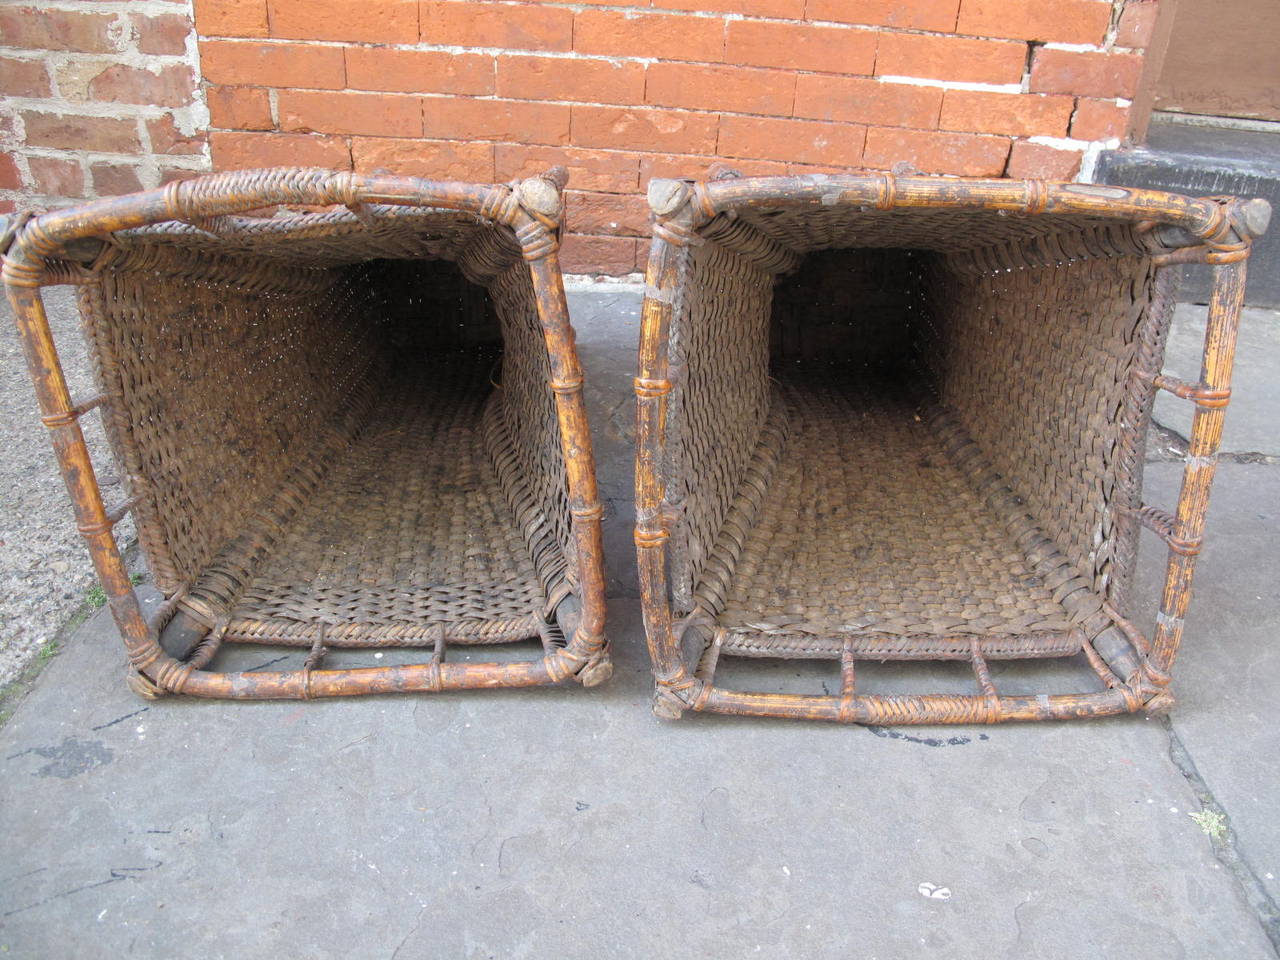 Similar pair of handwoven wicker and bamboo planters.